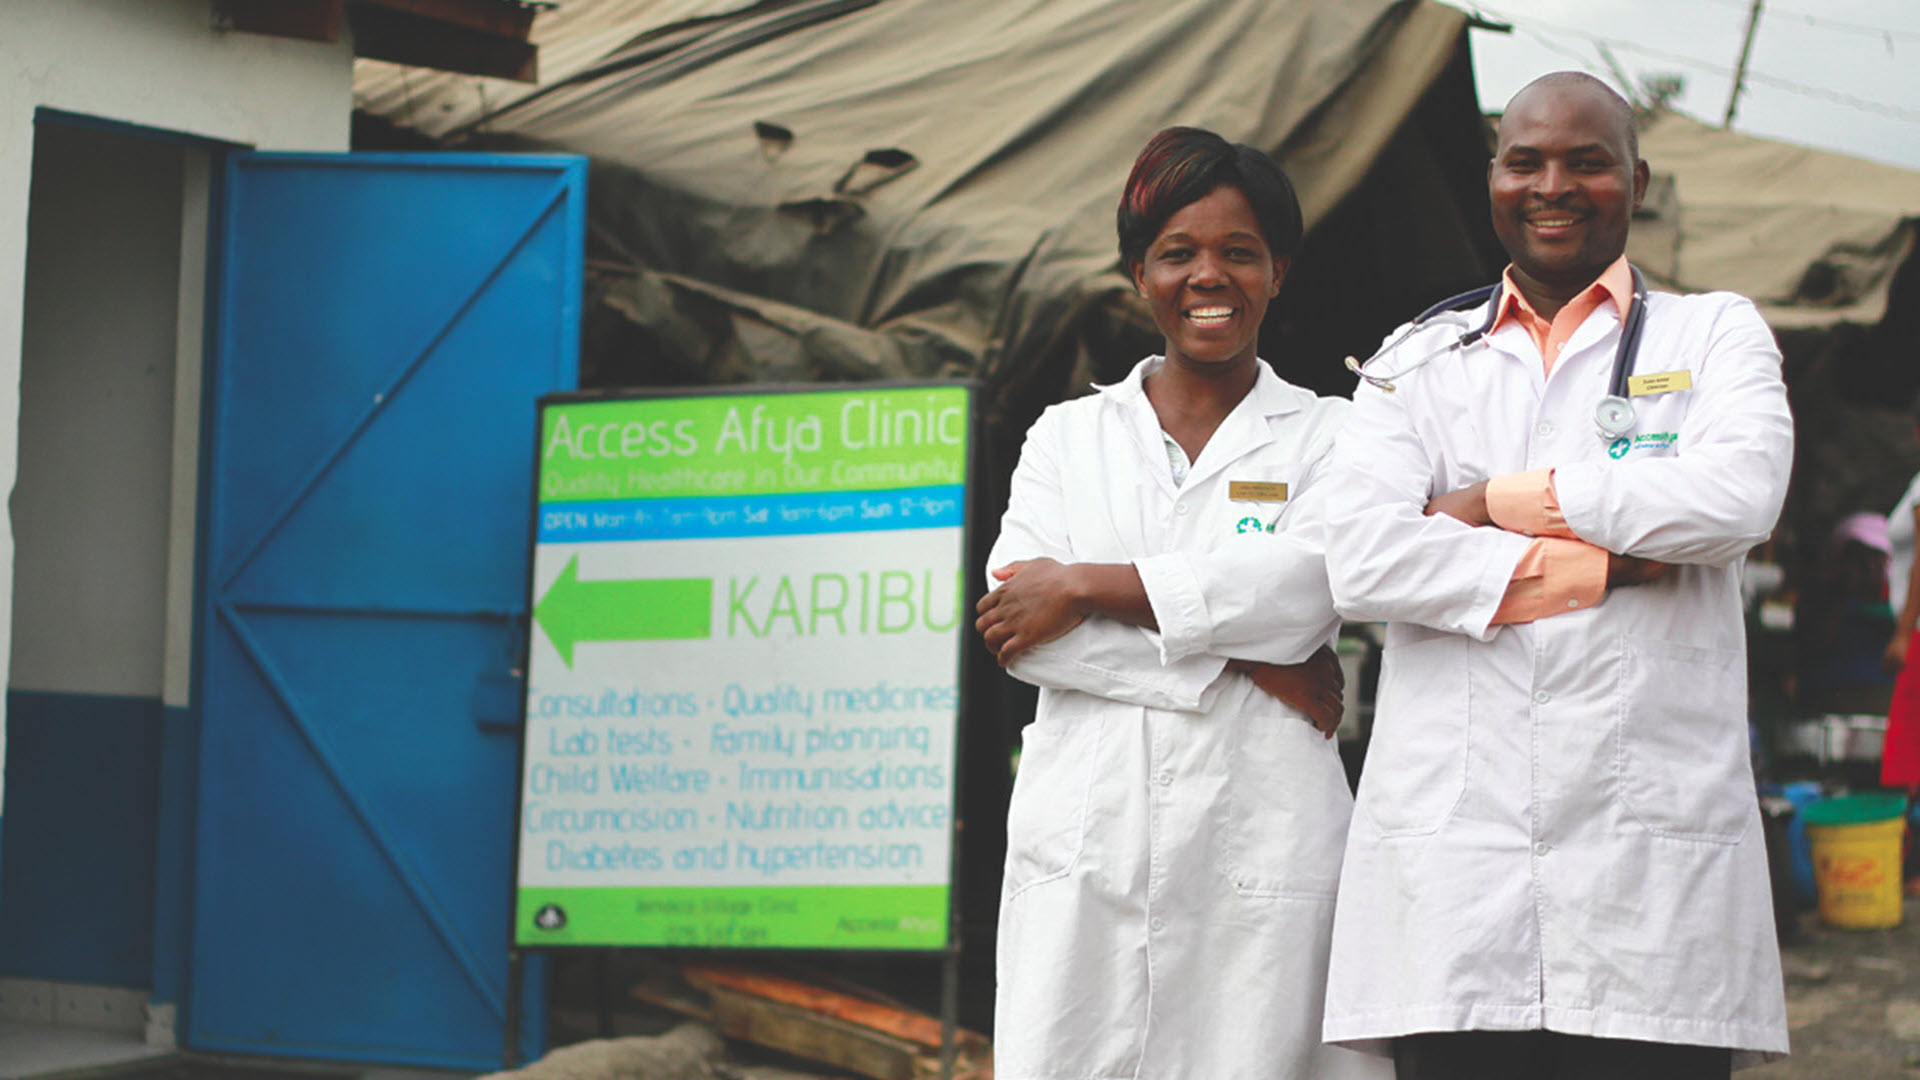 A feat of ingenuity: Social entrepreneurs transforming healthcare access through innovation